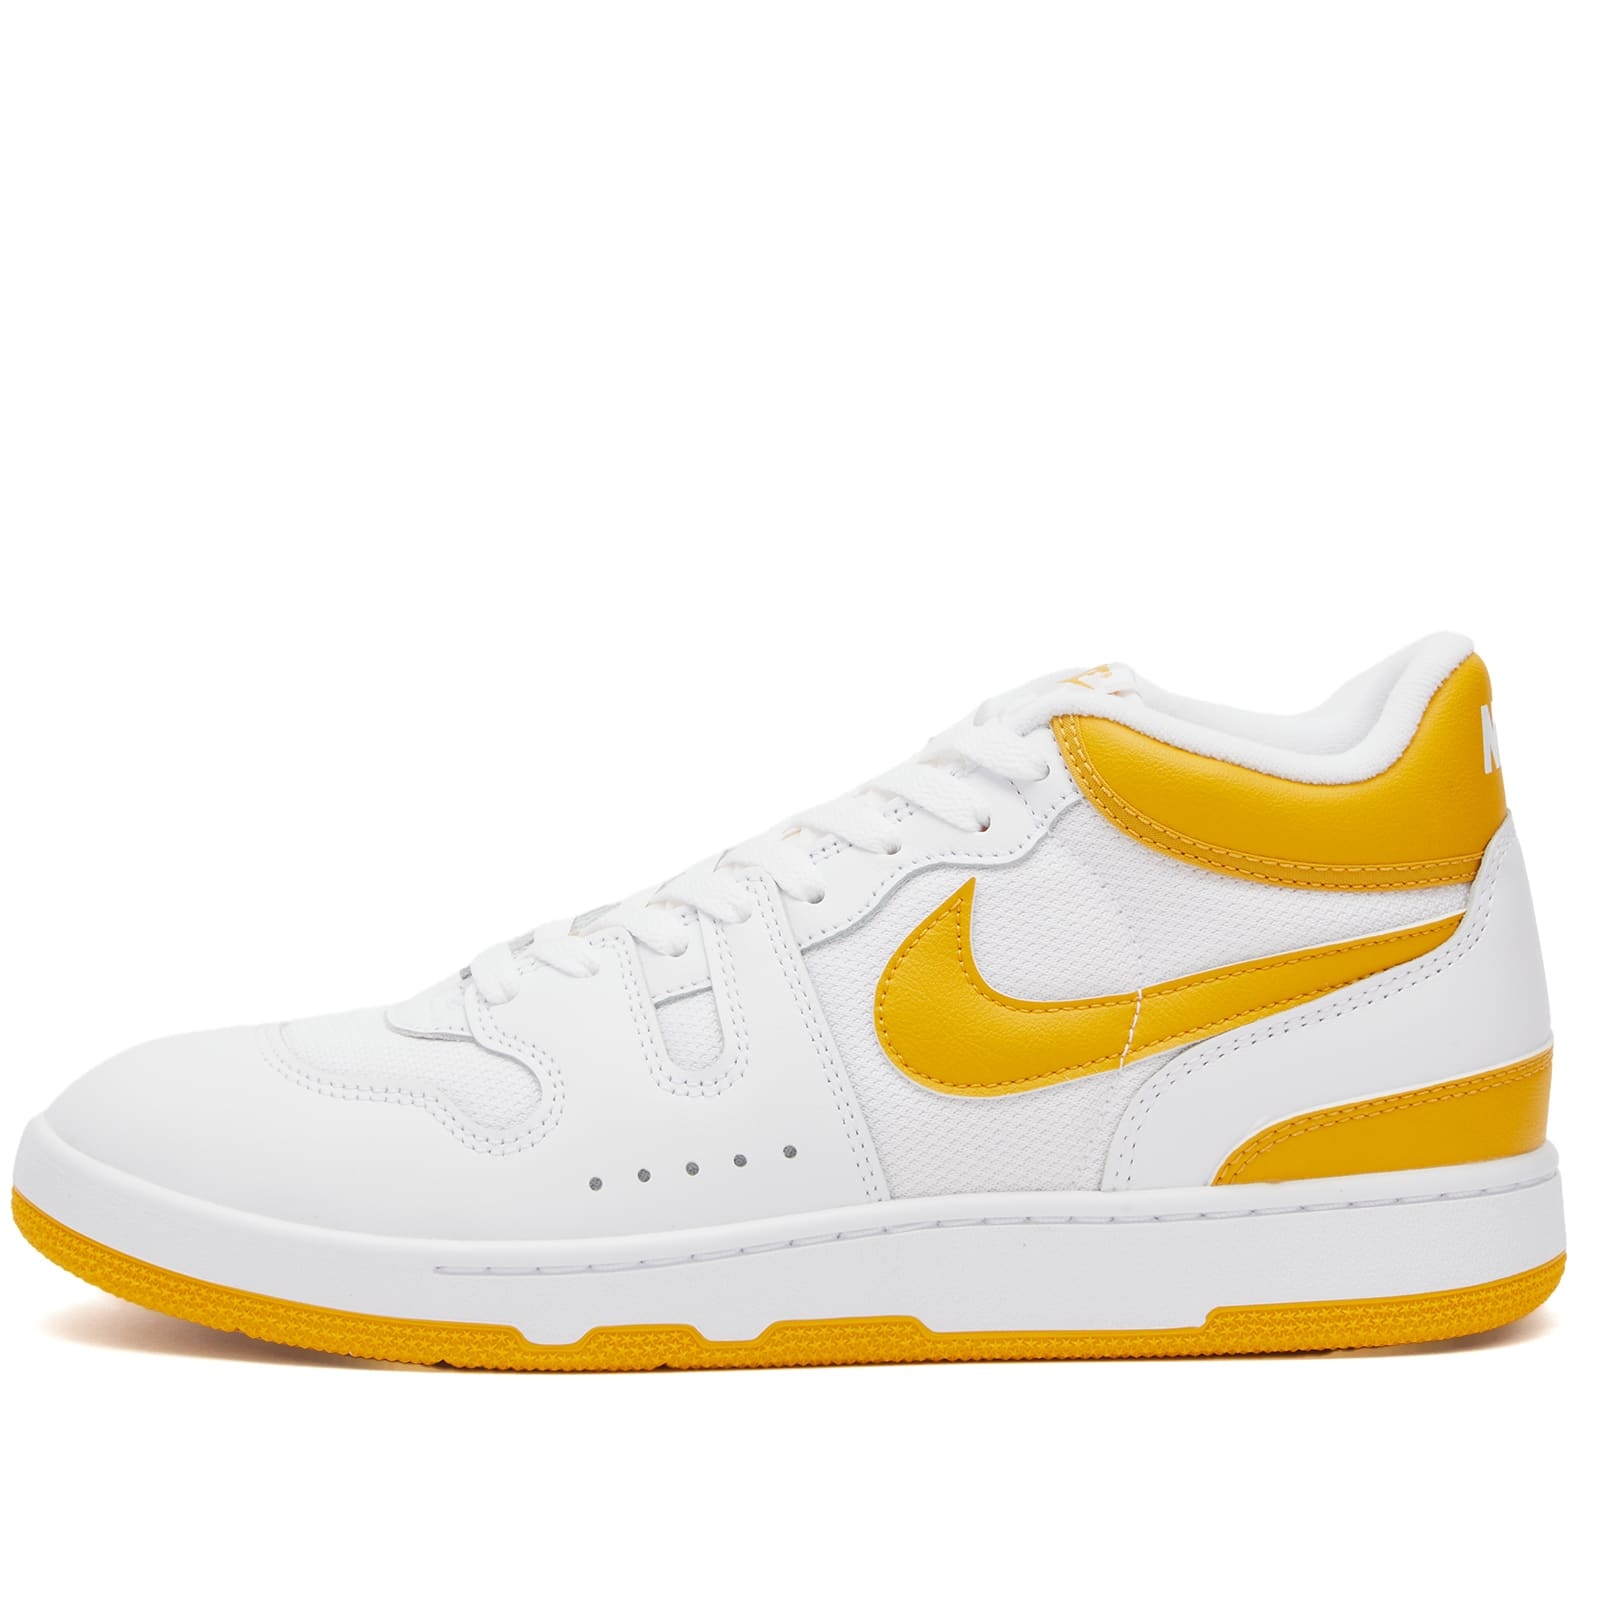 Nike Attack Qs SP - 2